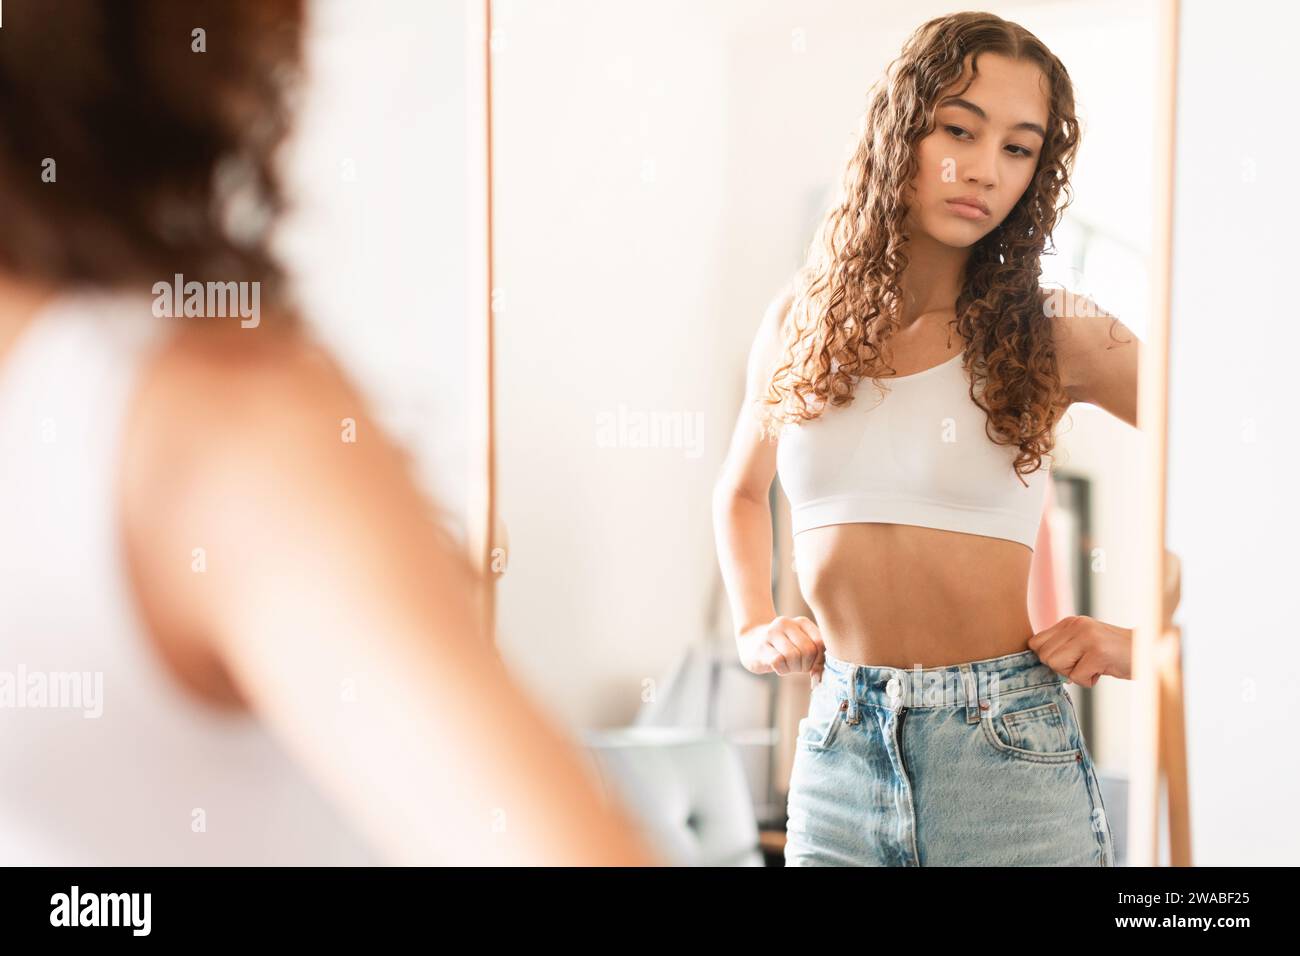 Unhappy teen girl looking critically at herself in mirror indoors Stock Photo